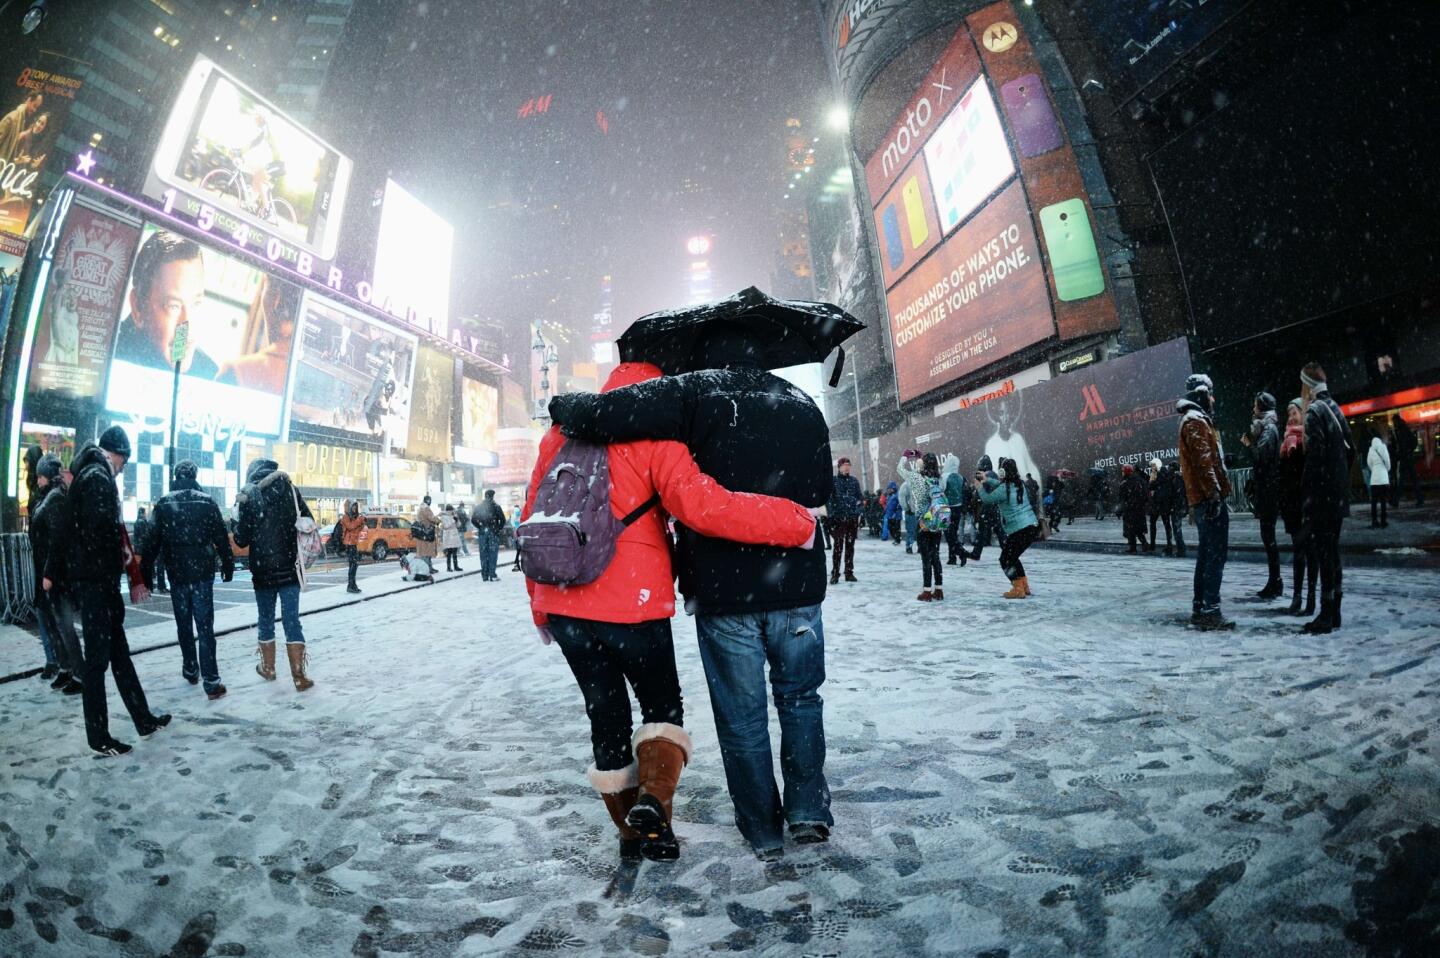 Visitors enjoy the snow on Broadway in Times Square.